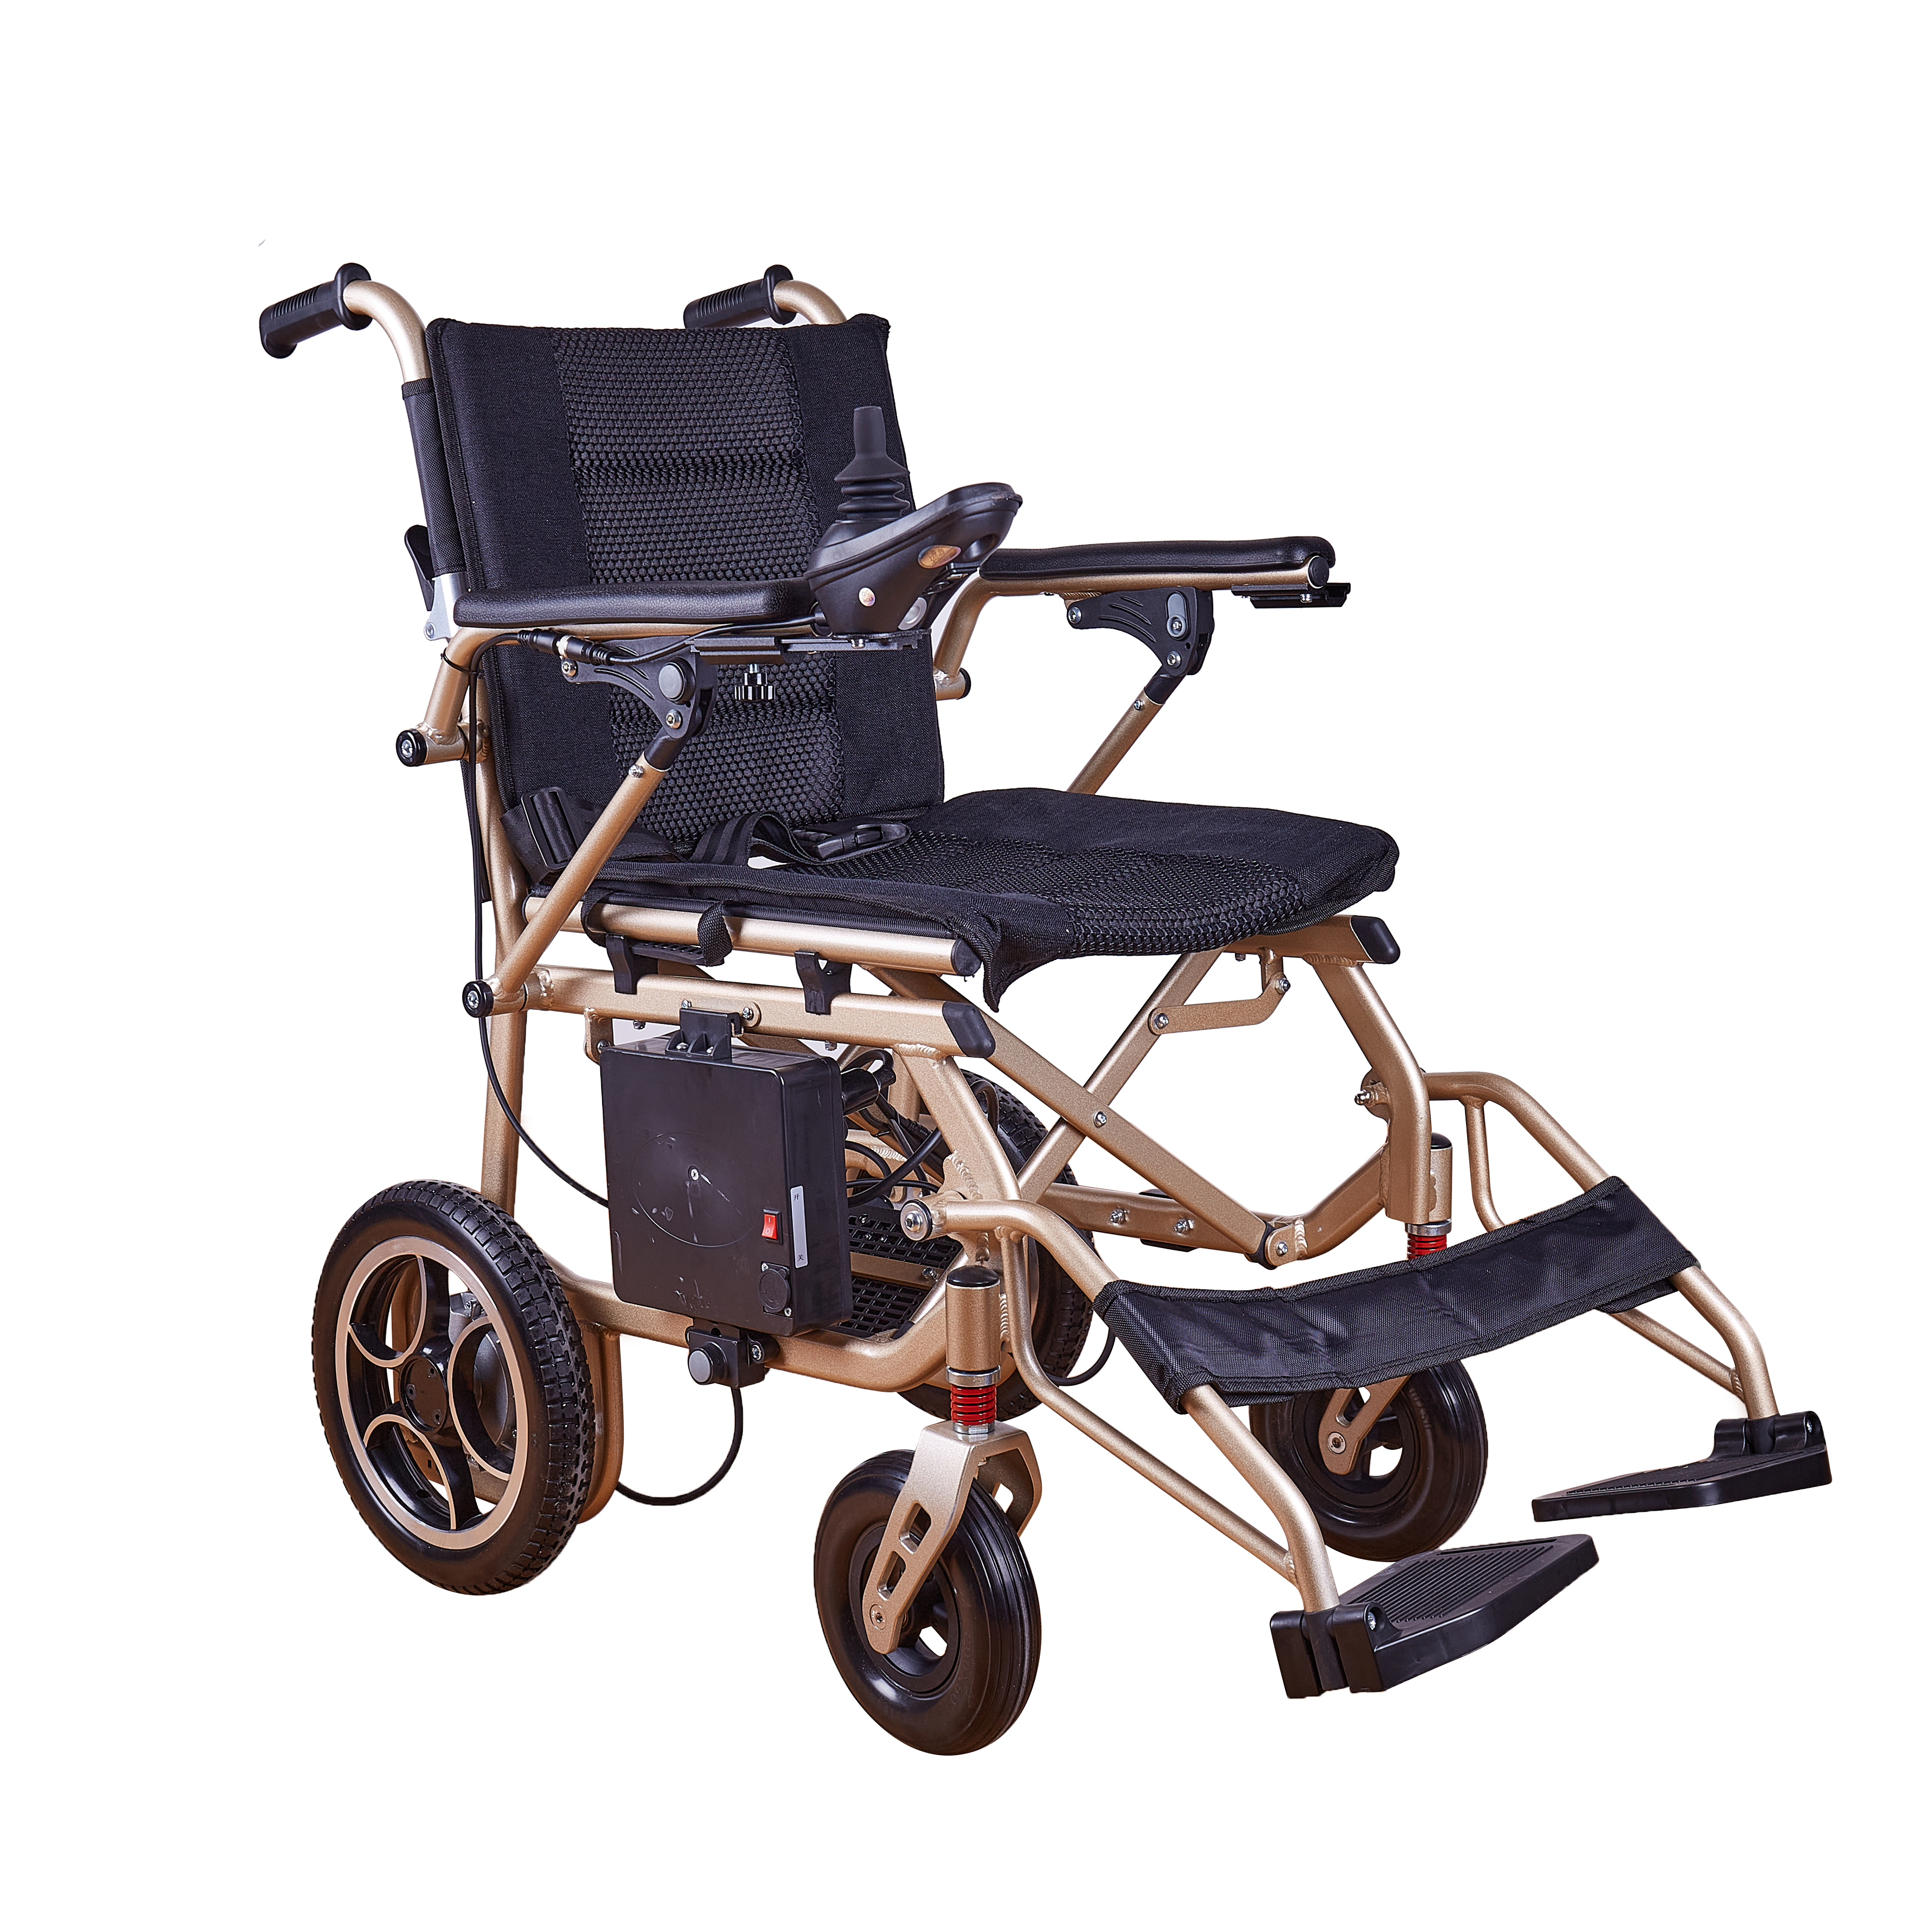 Kinds of Lightweight Portable Folding Mobility Electric Wheelchair for Disabled